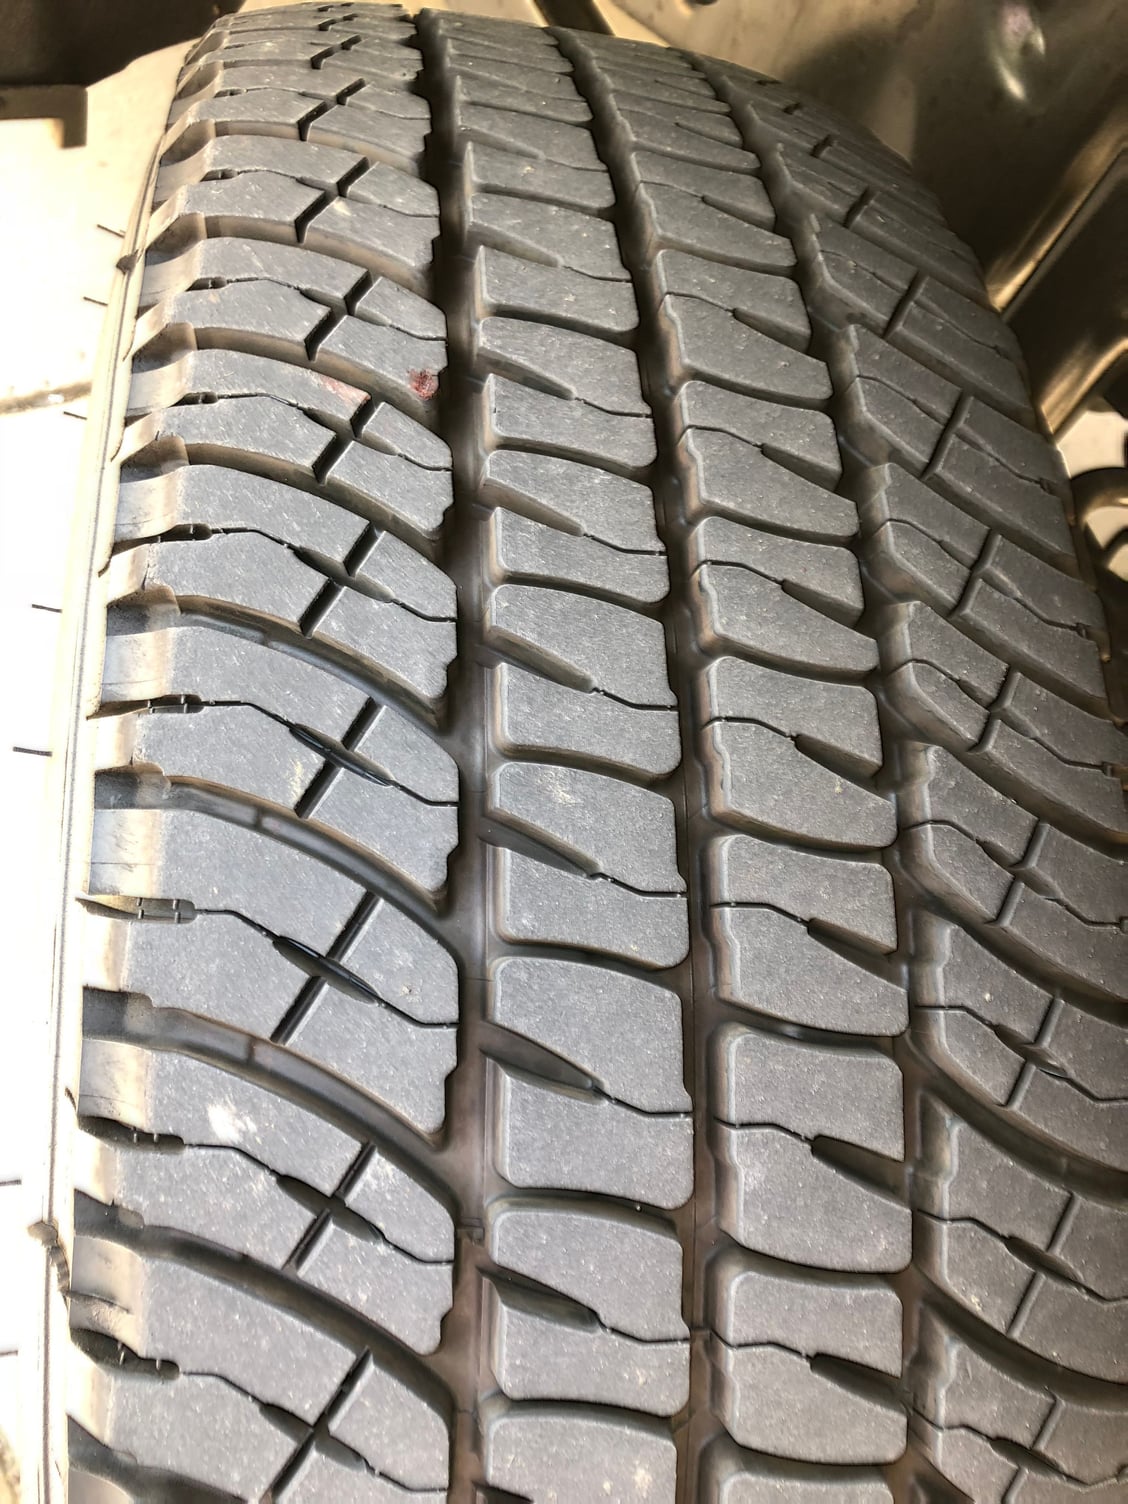 Wheels and Tires/Axles - 2017 2018 Super Duty Lariat 20" wheels and Michelin tires - Used - 2005 to 2019 Ford All Models - Sacramento, CA 95825, United States